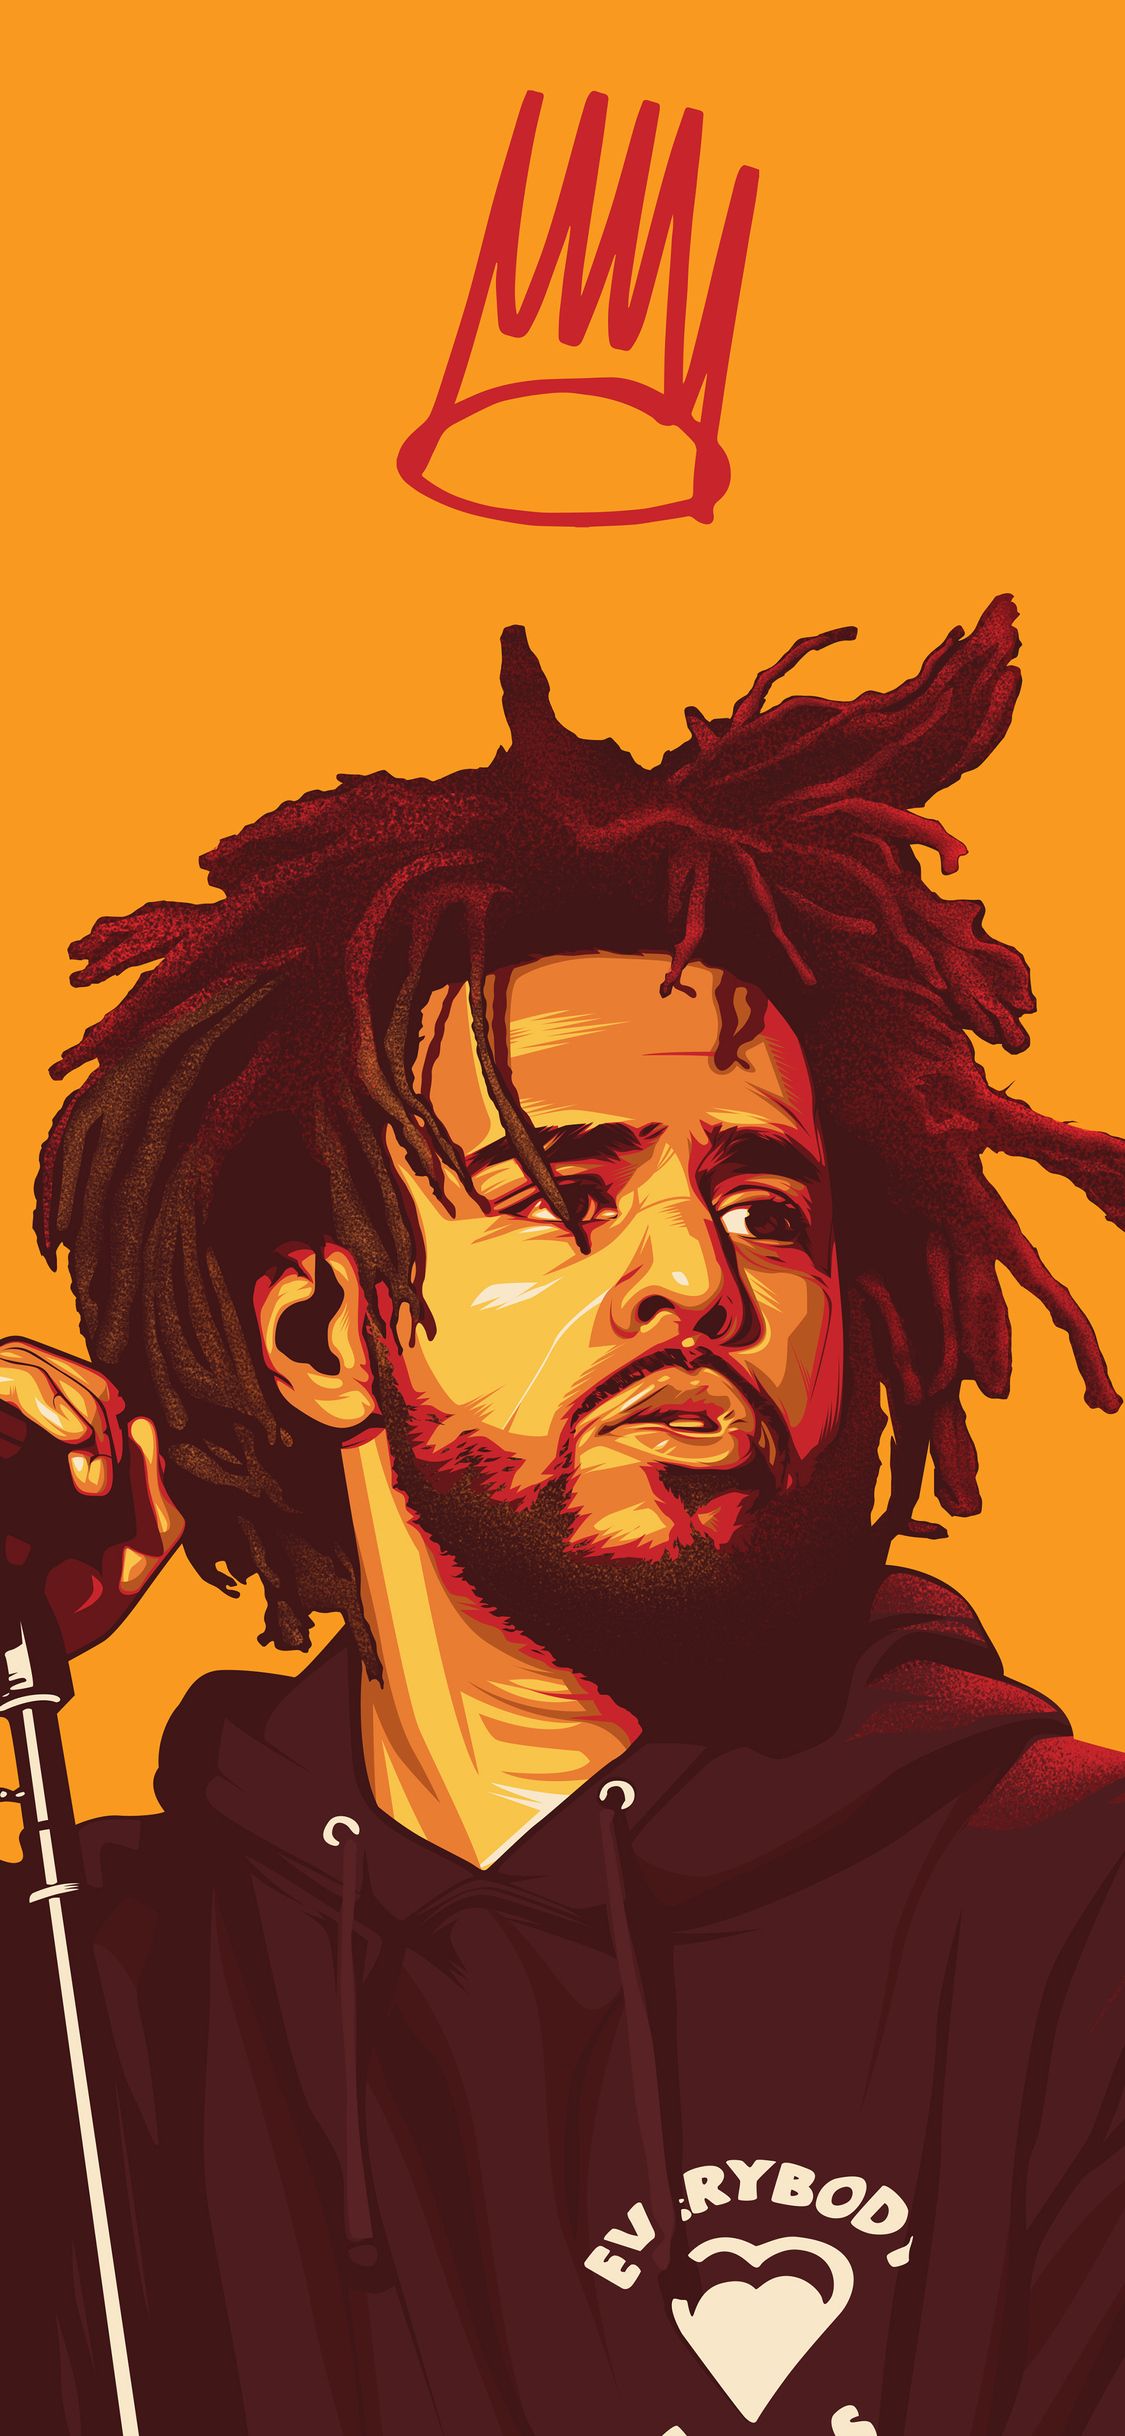 J Cole Revealed as a Cover Star for NBA 2K23 Appears in the Game   Pitchfork